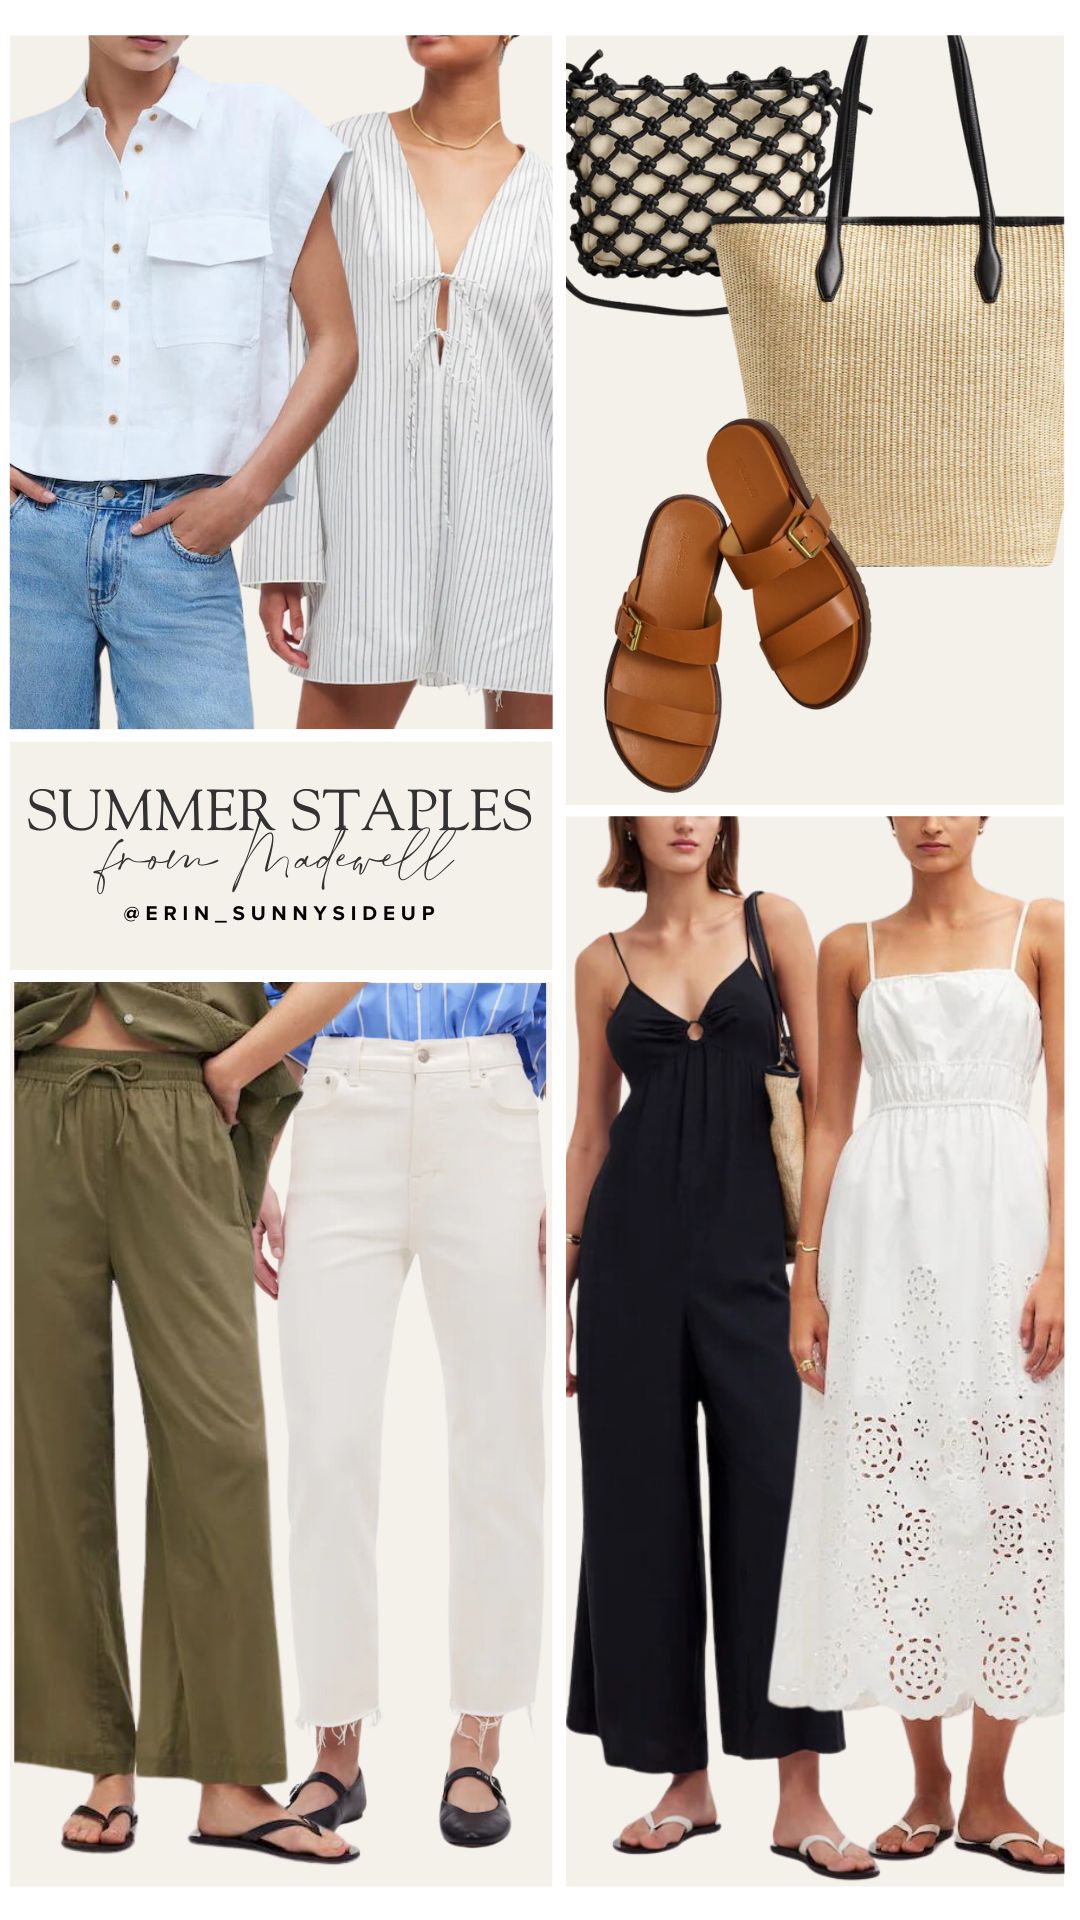 Madewell Summer Staples (Sunny Side Up)